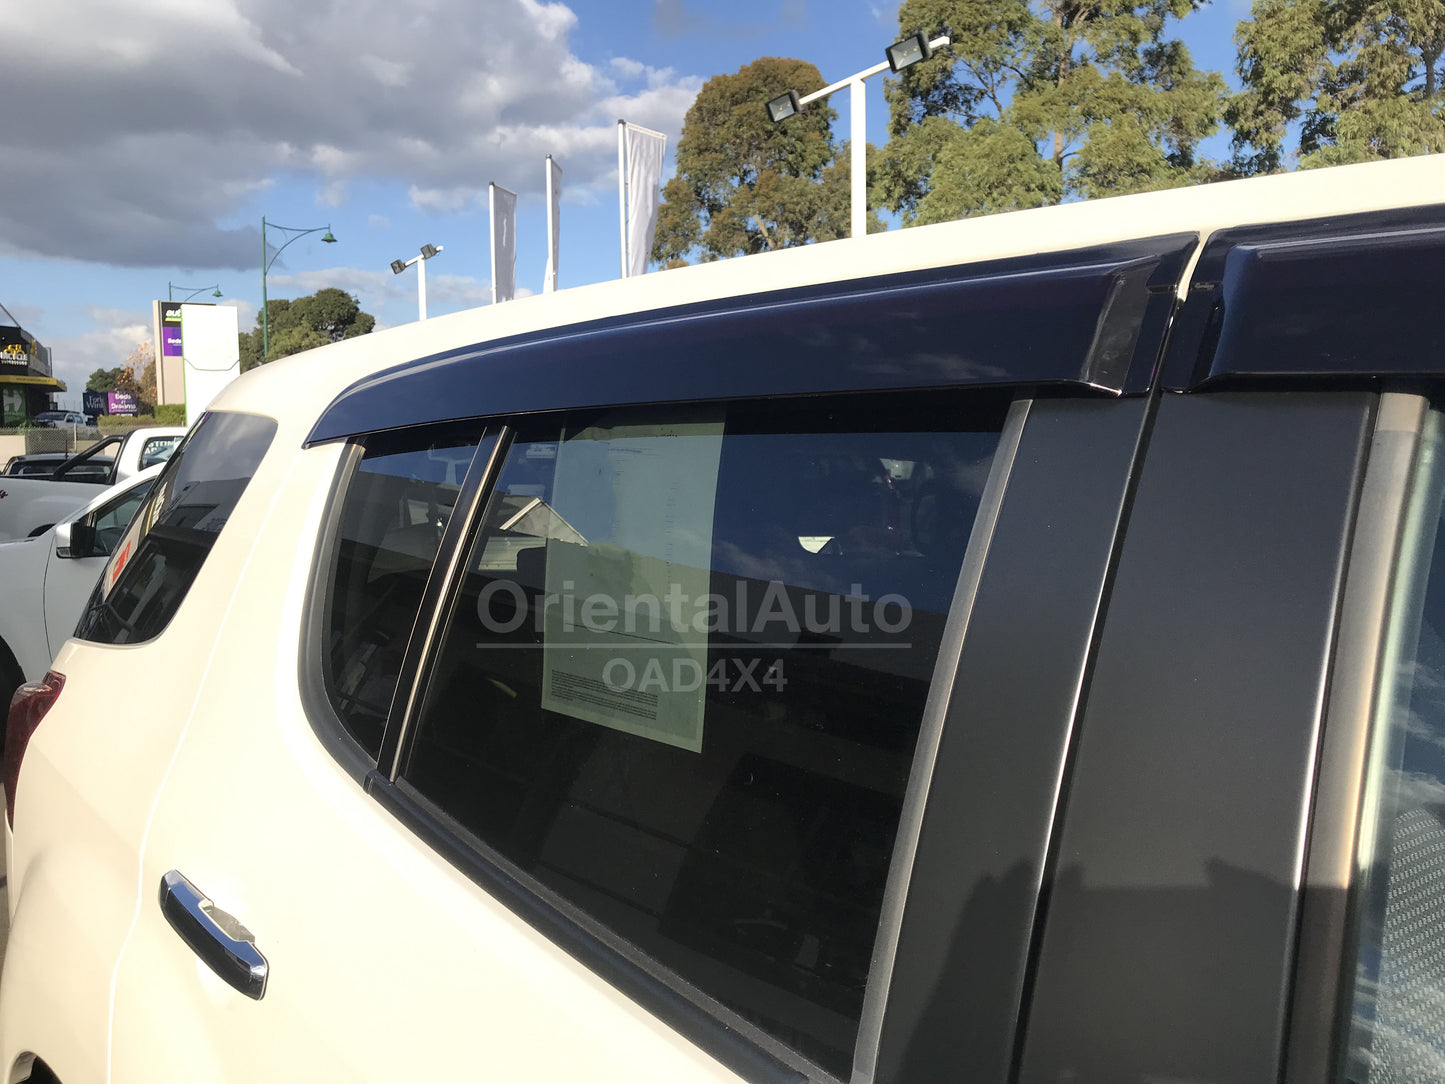 Injection Weathershields Weather Shields Window Visor For Holden Colorado 7 RG Series 2012+